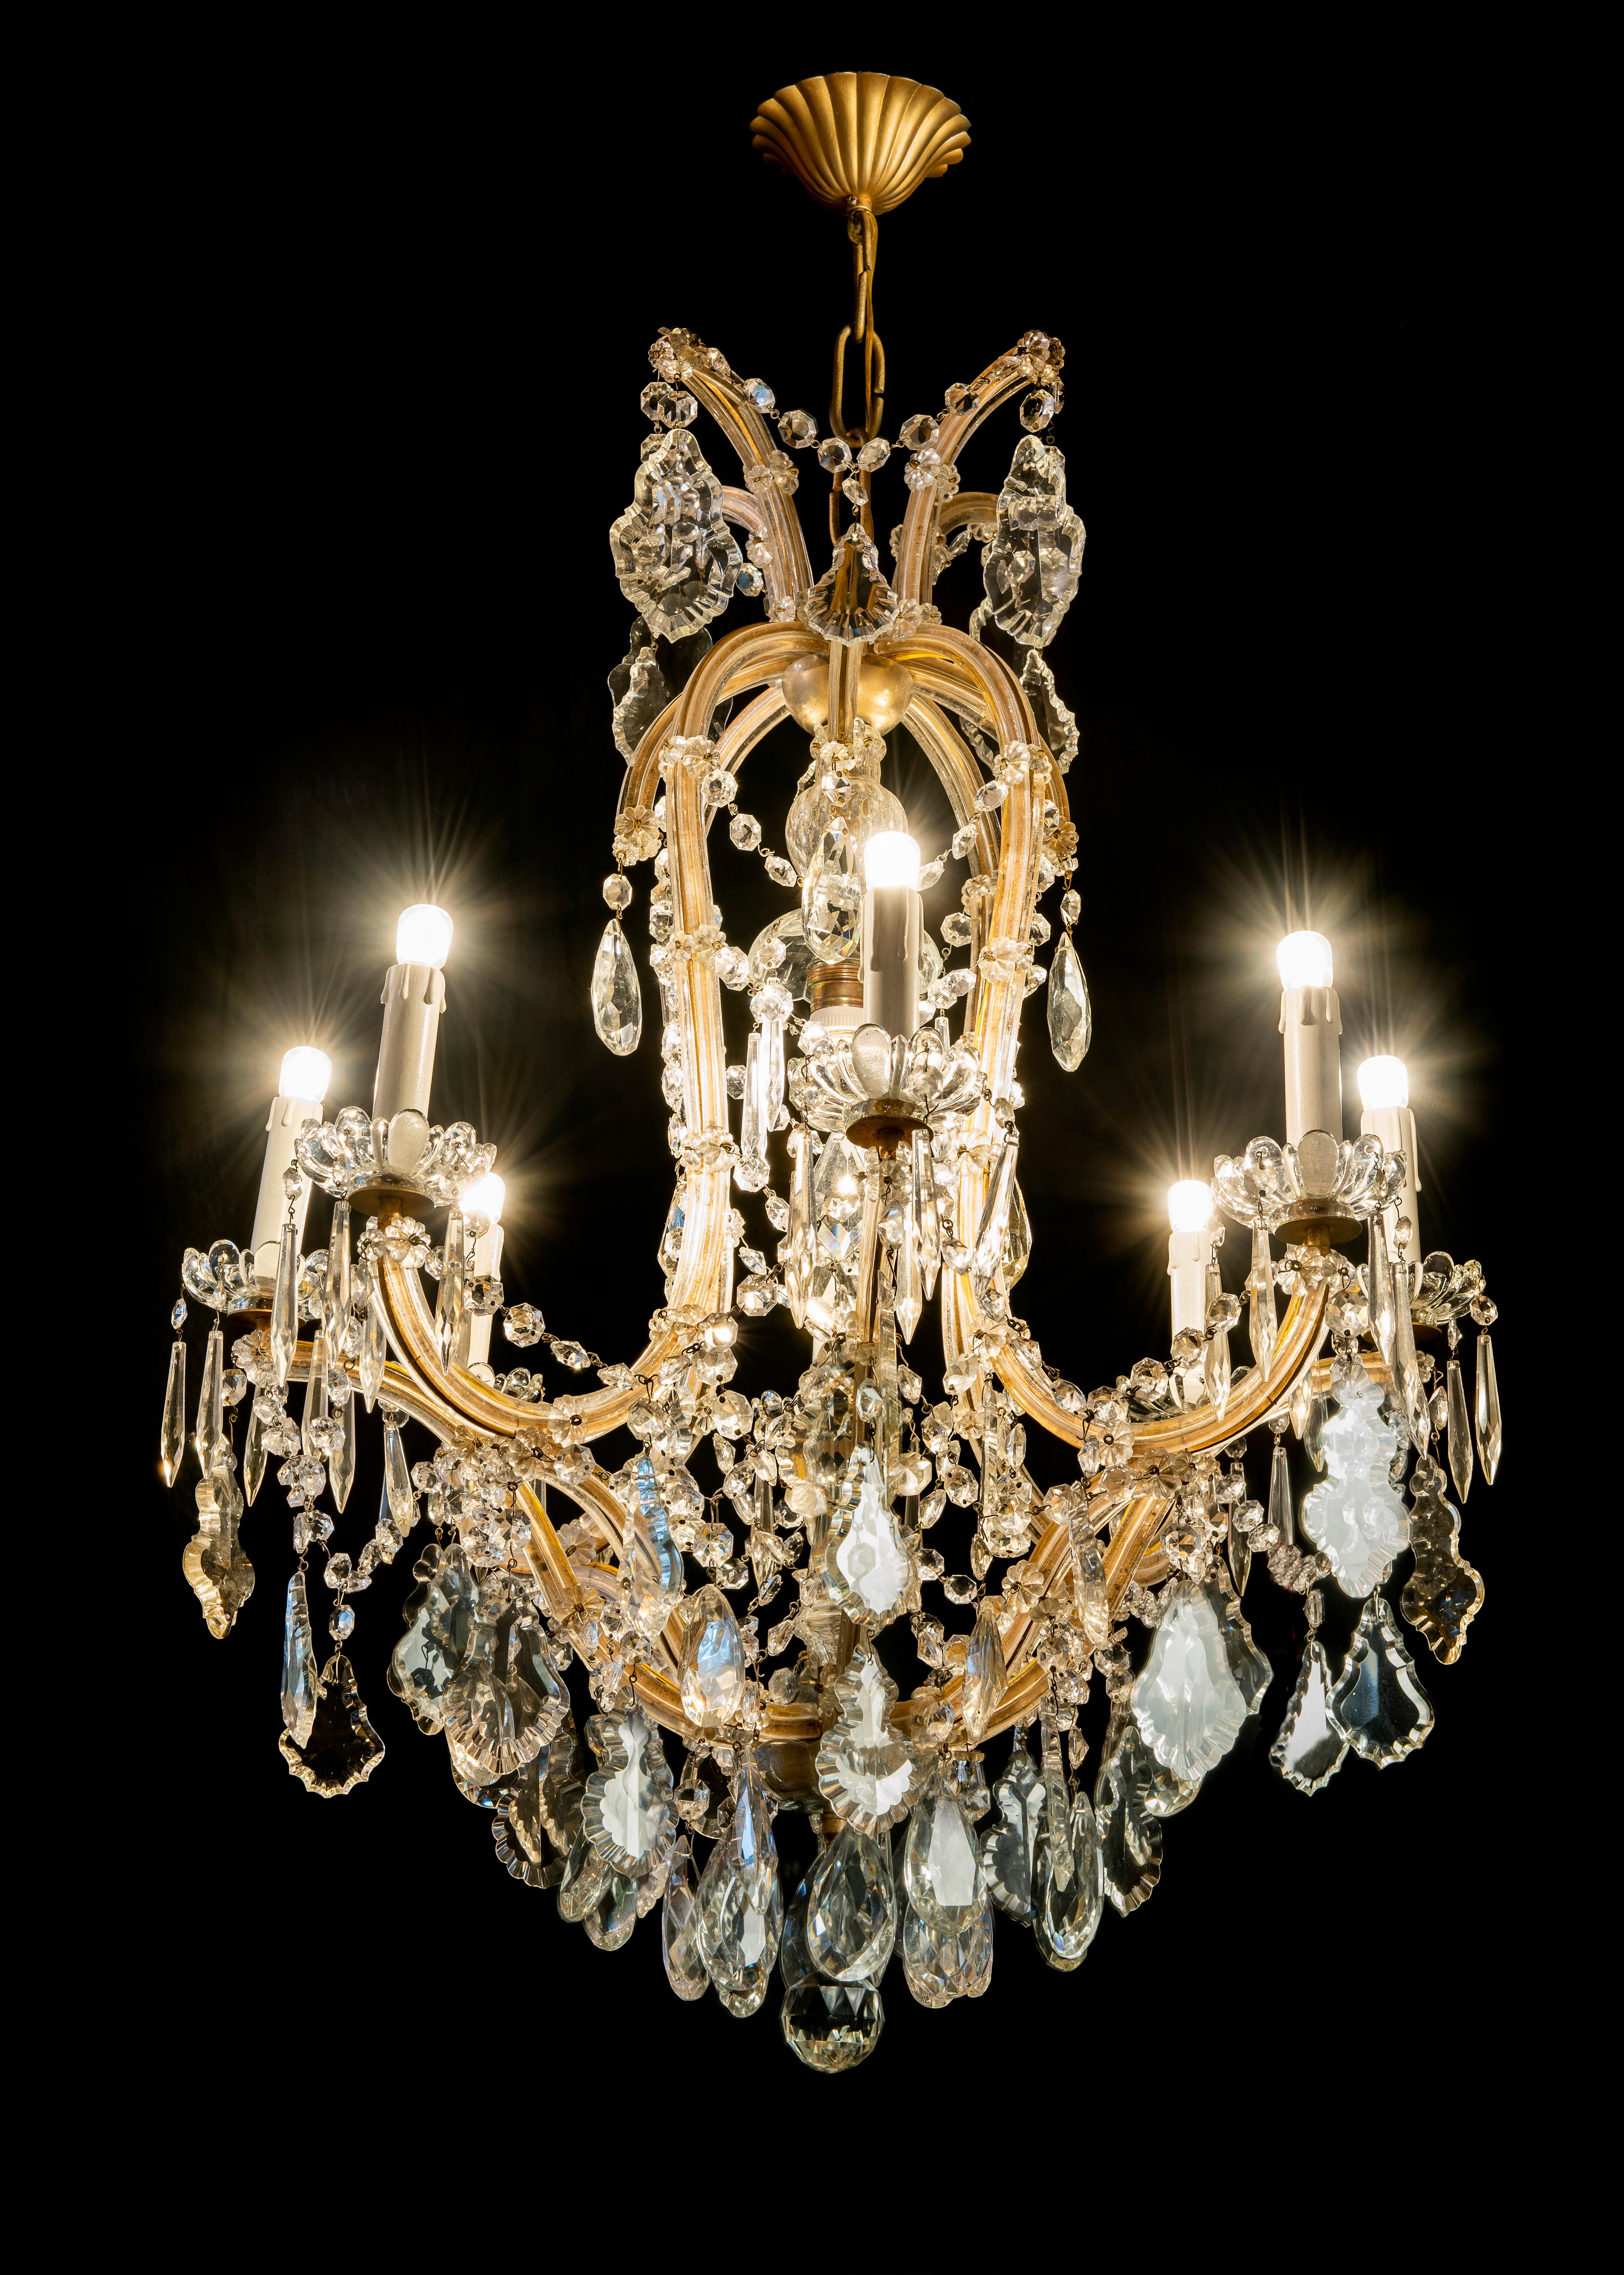 Faceted Marie Therese Crystal Chandelier Mid-20th Century Nine-Light Pendant from Italy